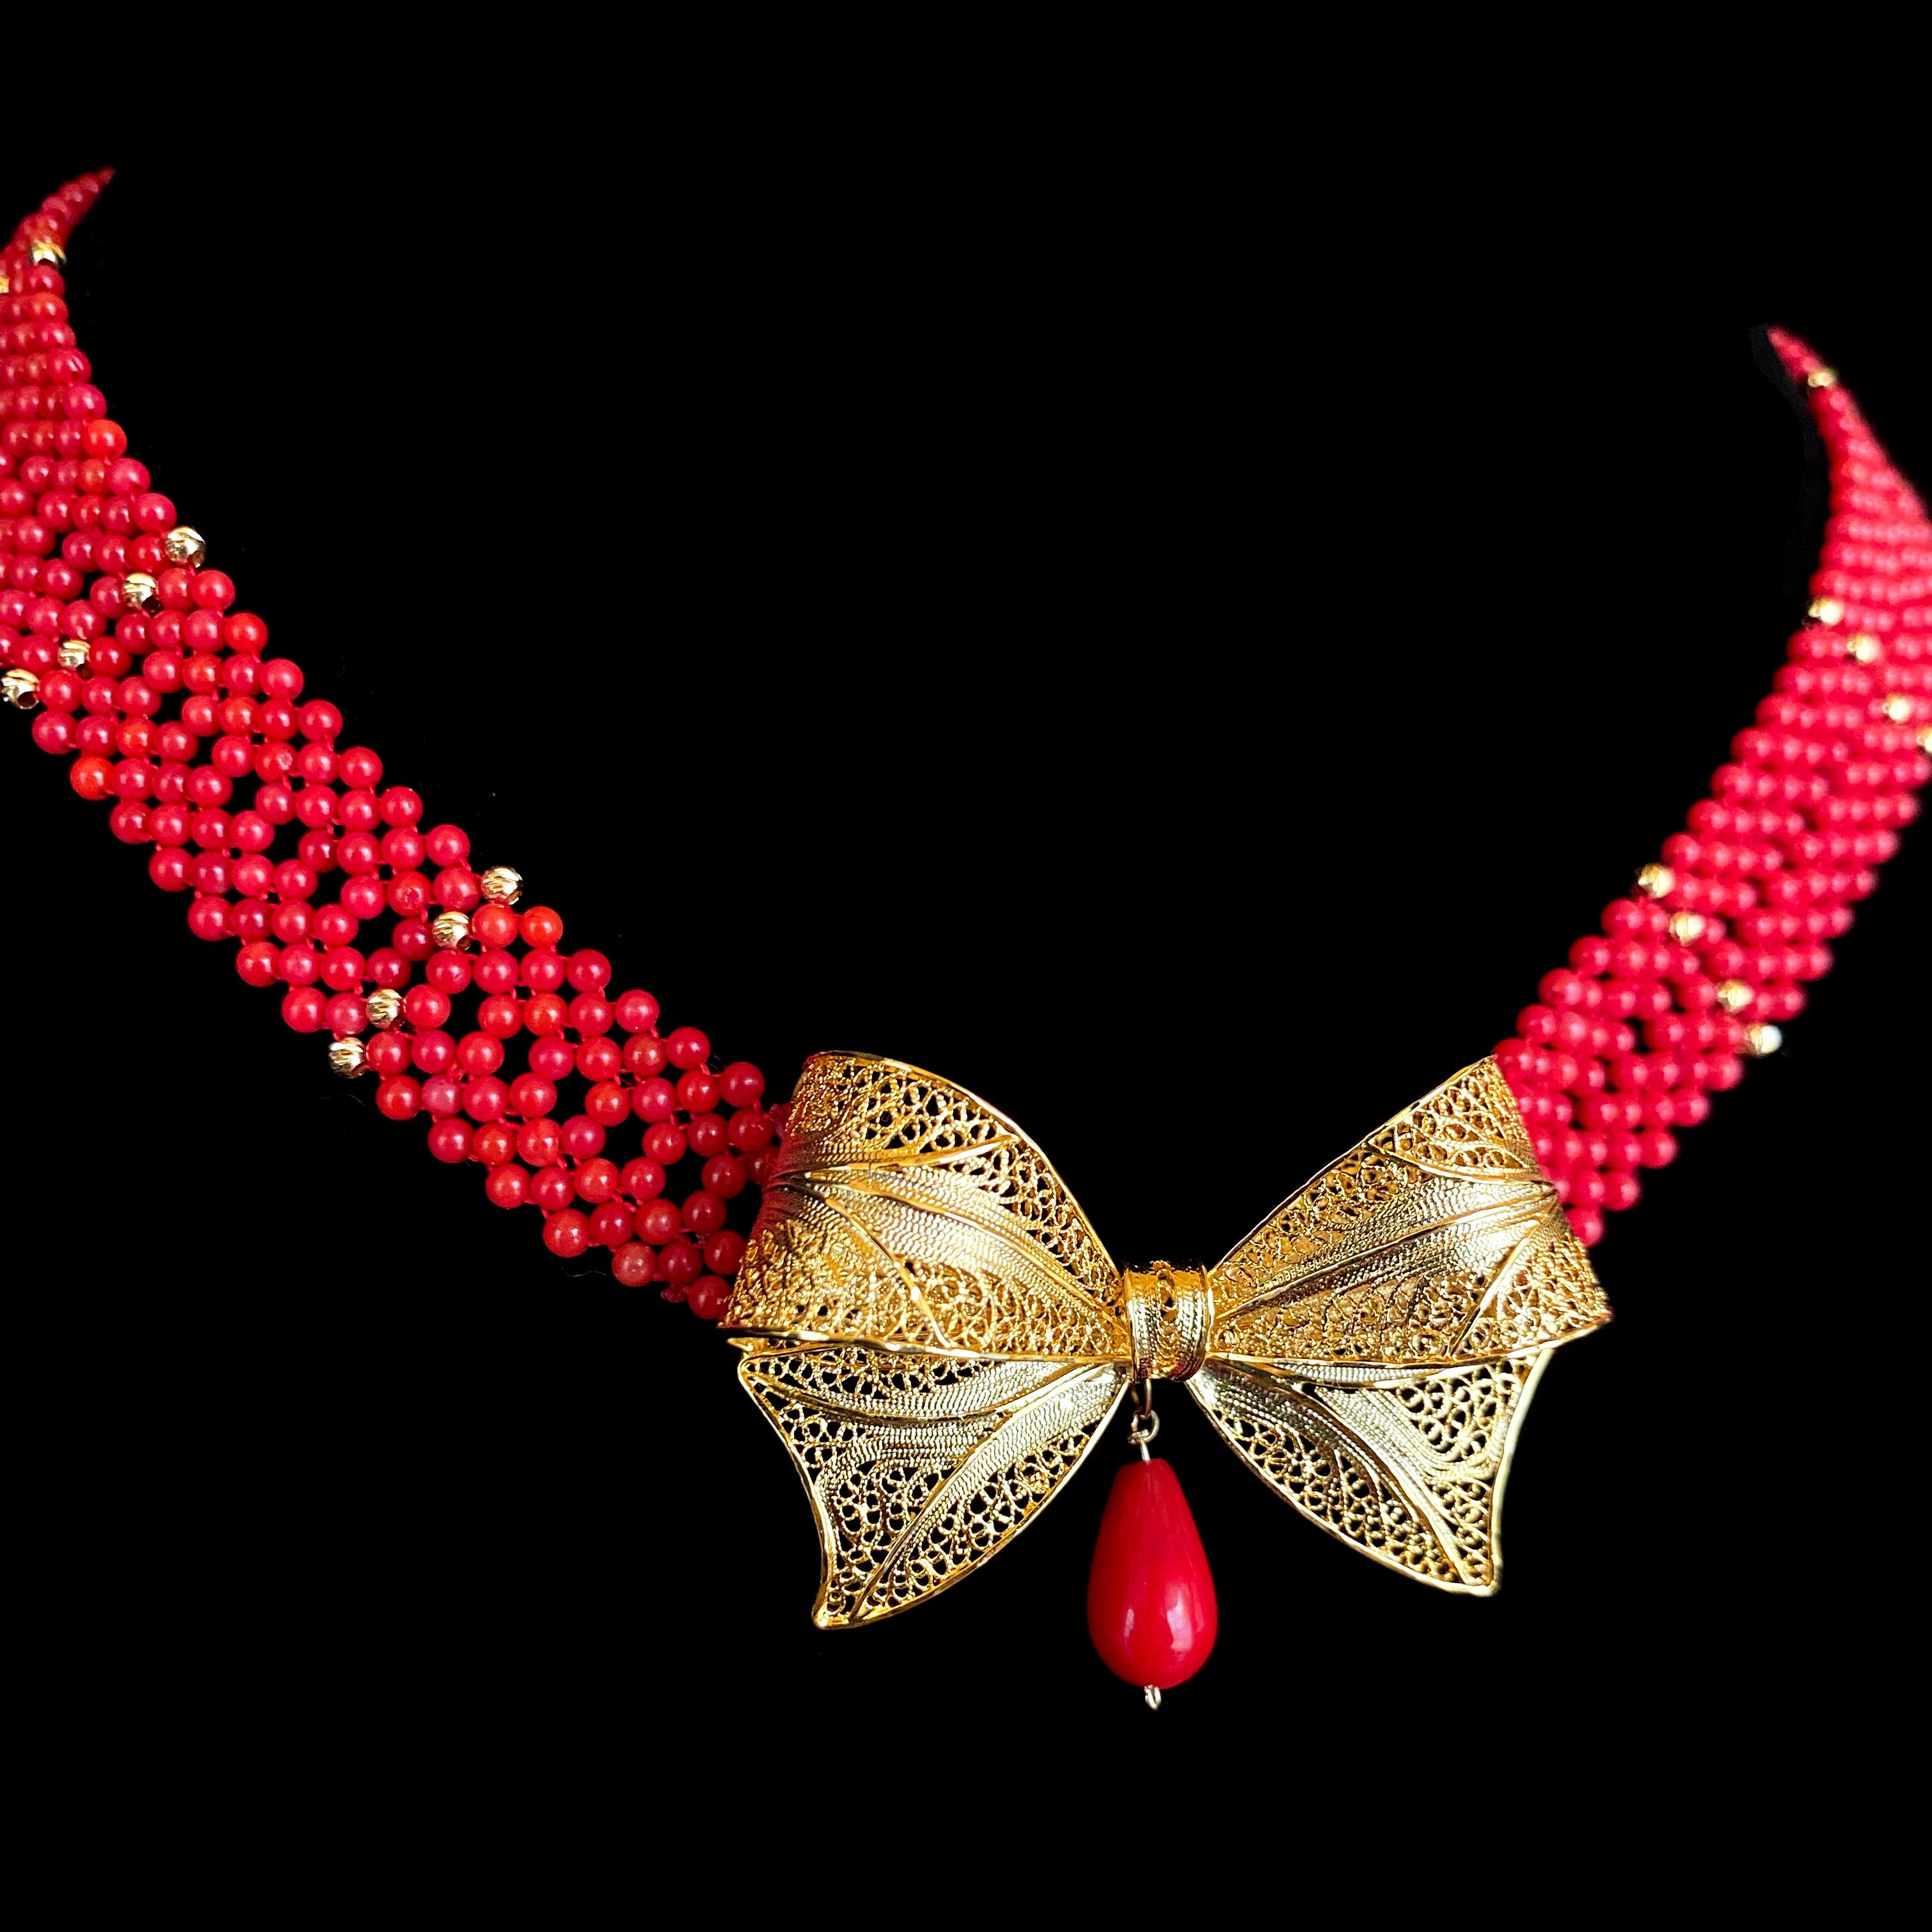 Bead Marina J Coral Woven Necklace with 18k Plated Bowtie Centerpiece & Detailings For Sale